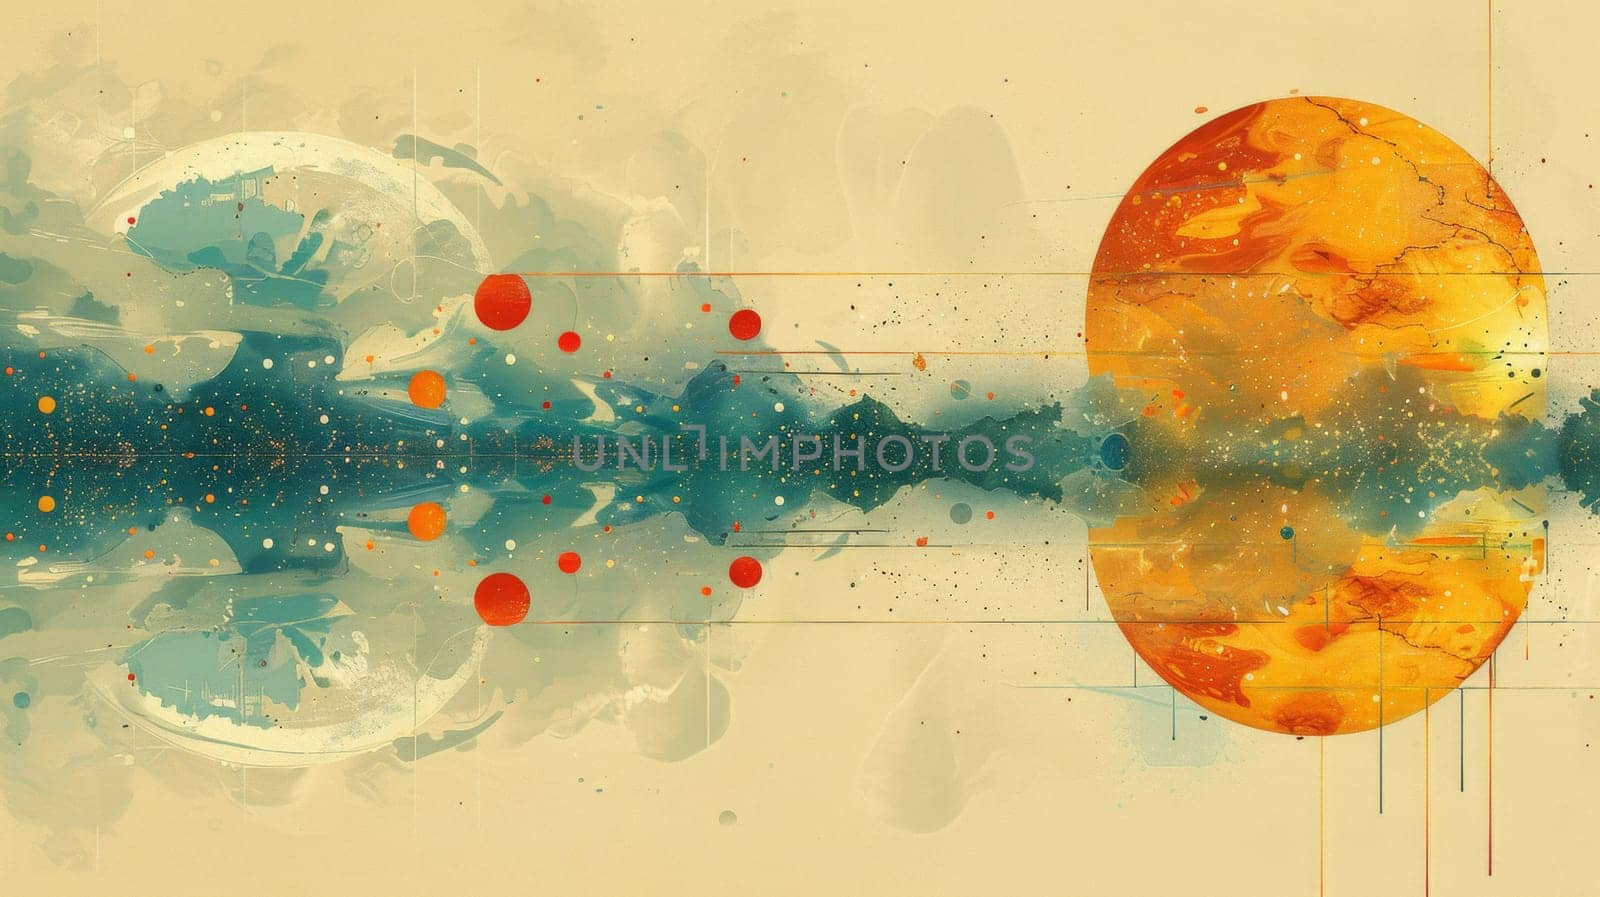 A painting of an orange and a yellow orb with dots in the background